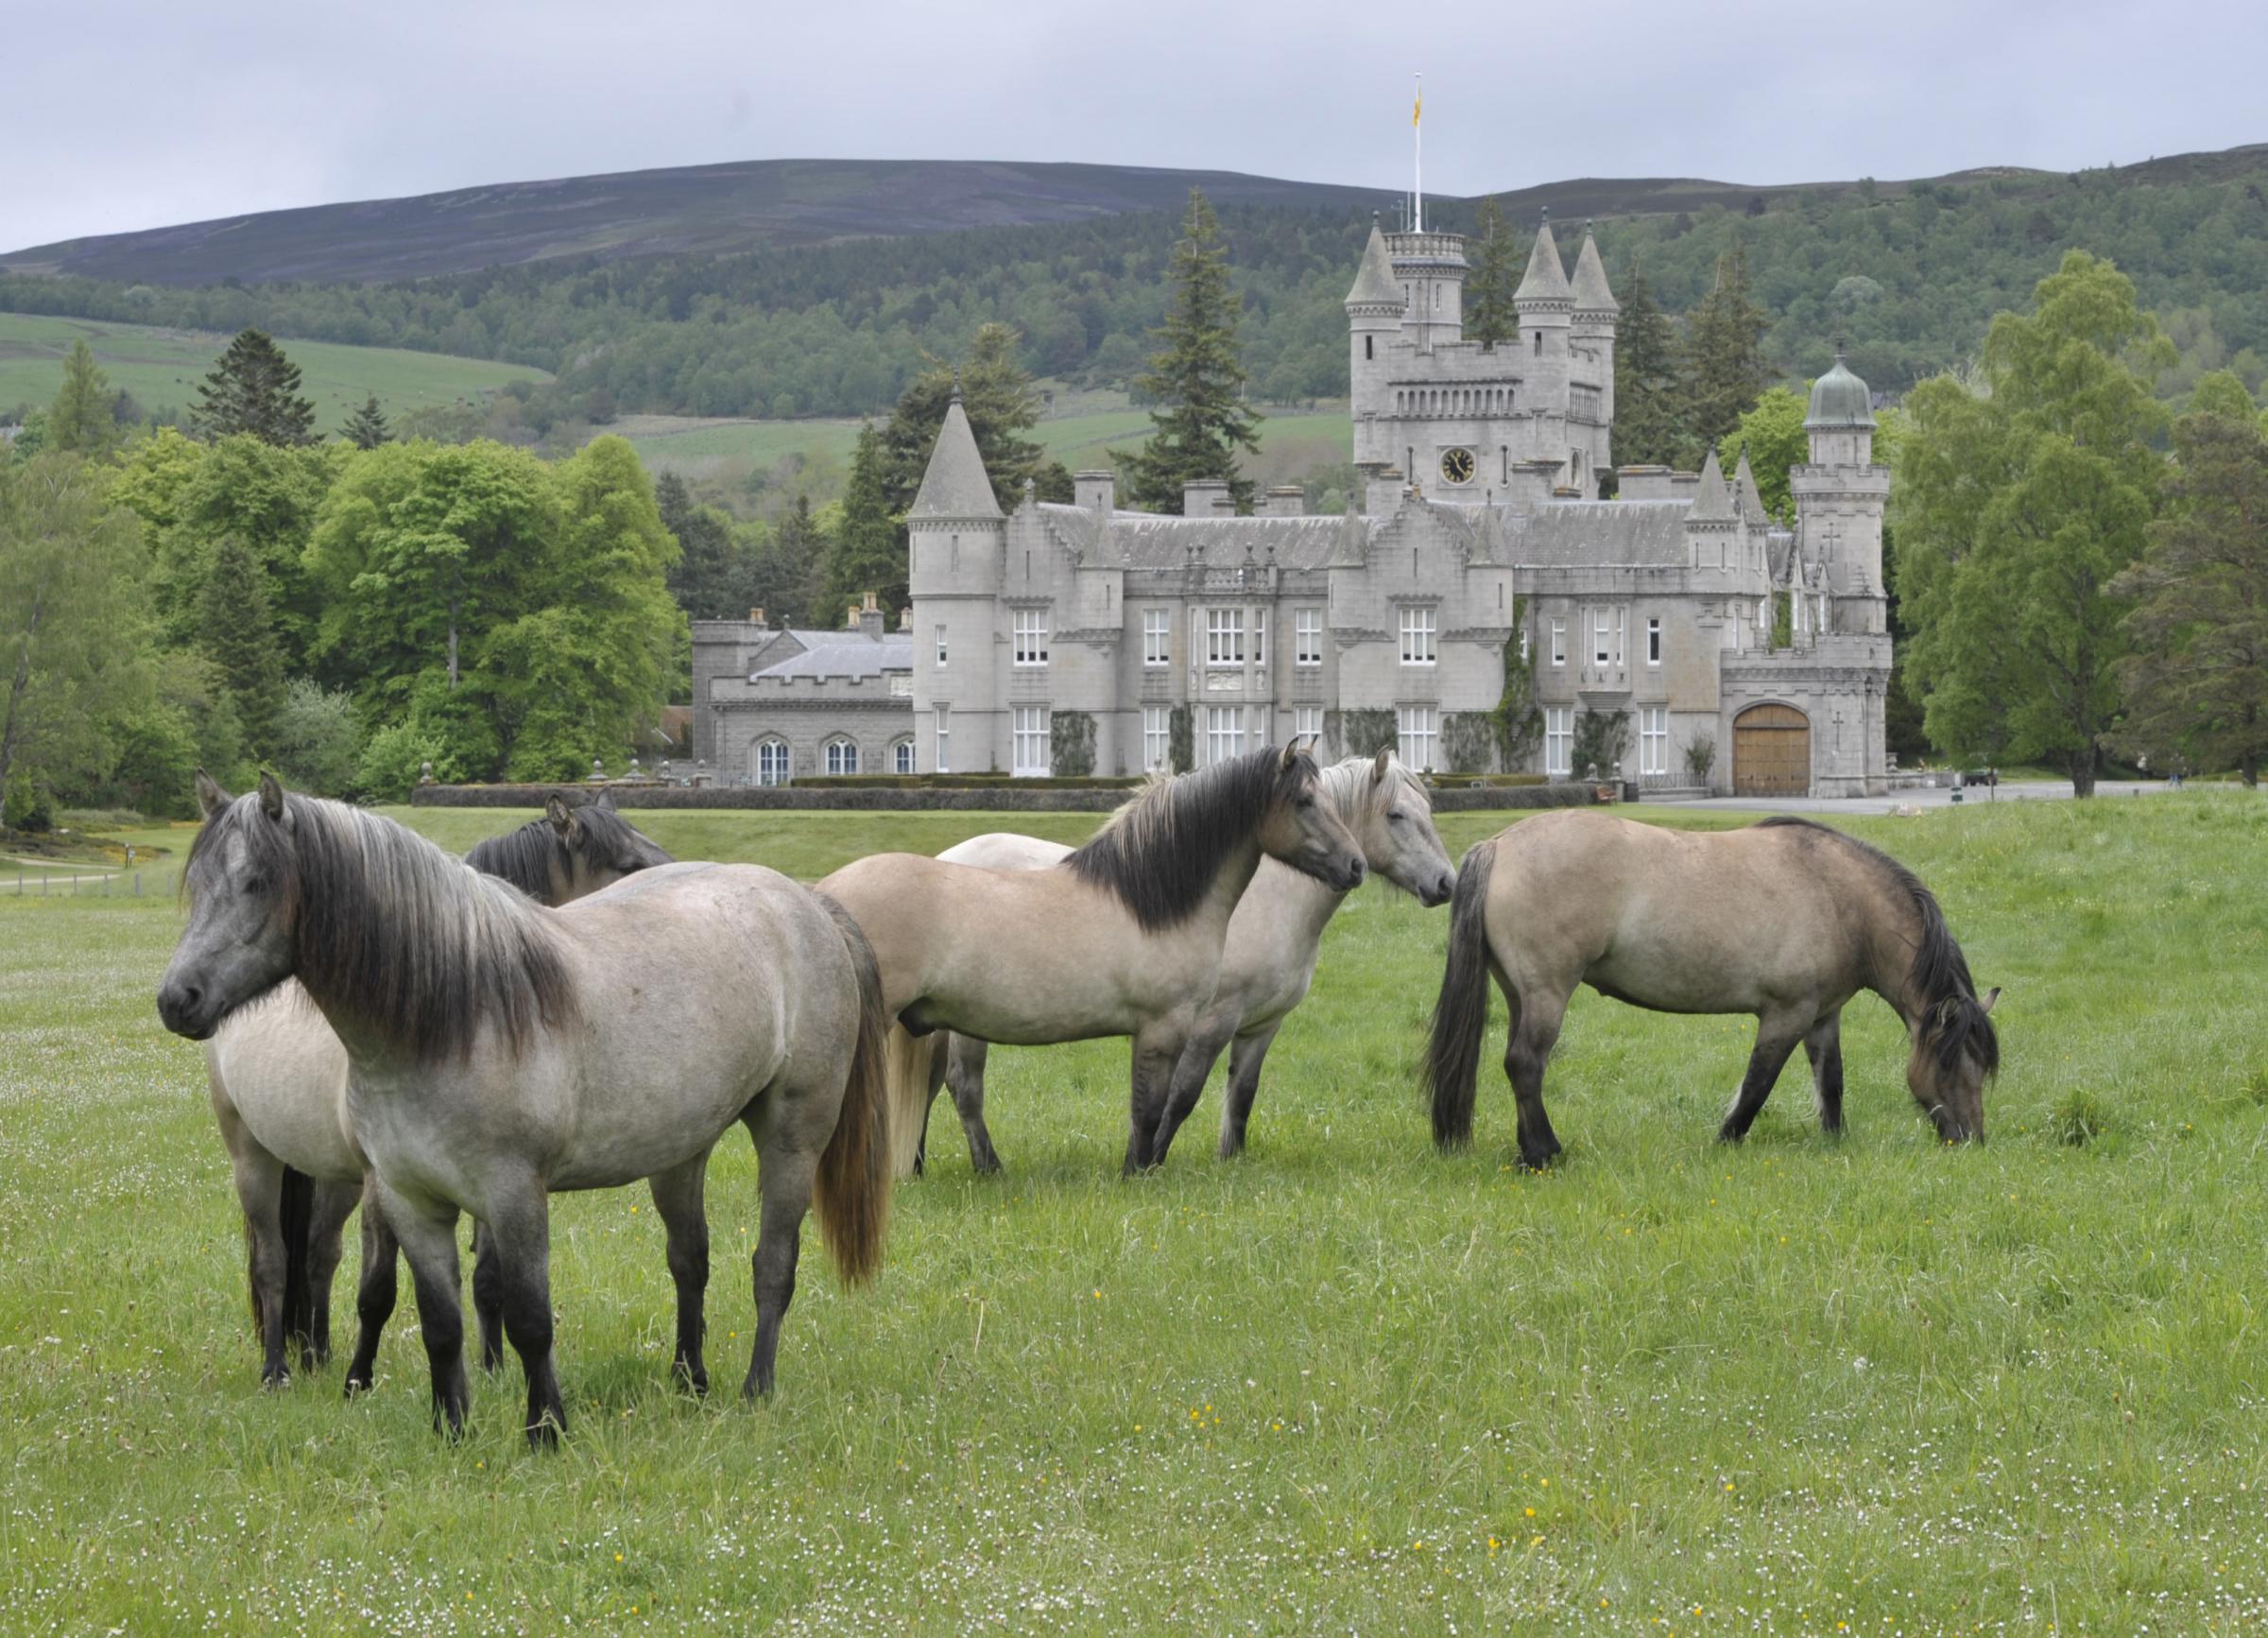 Highland ponies at Balmoral, photographed by The SF in 2012